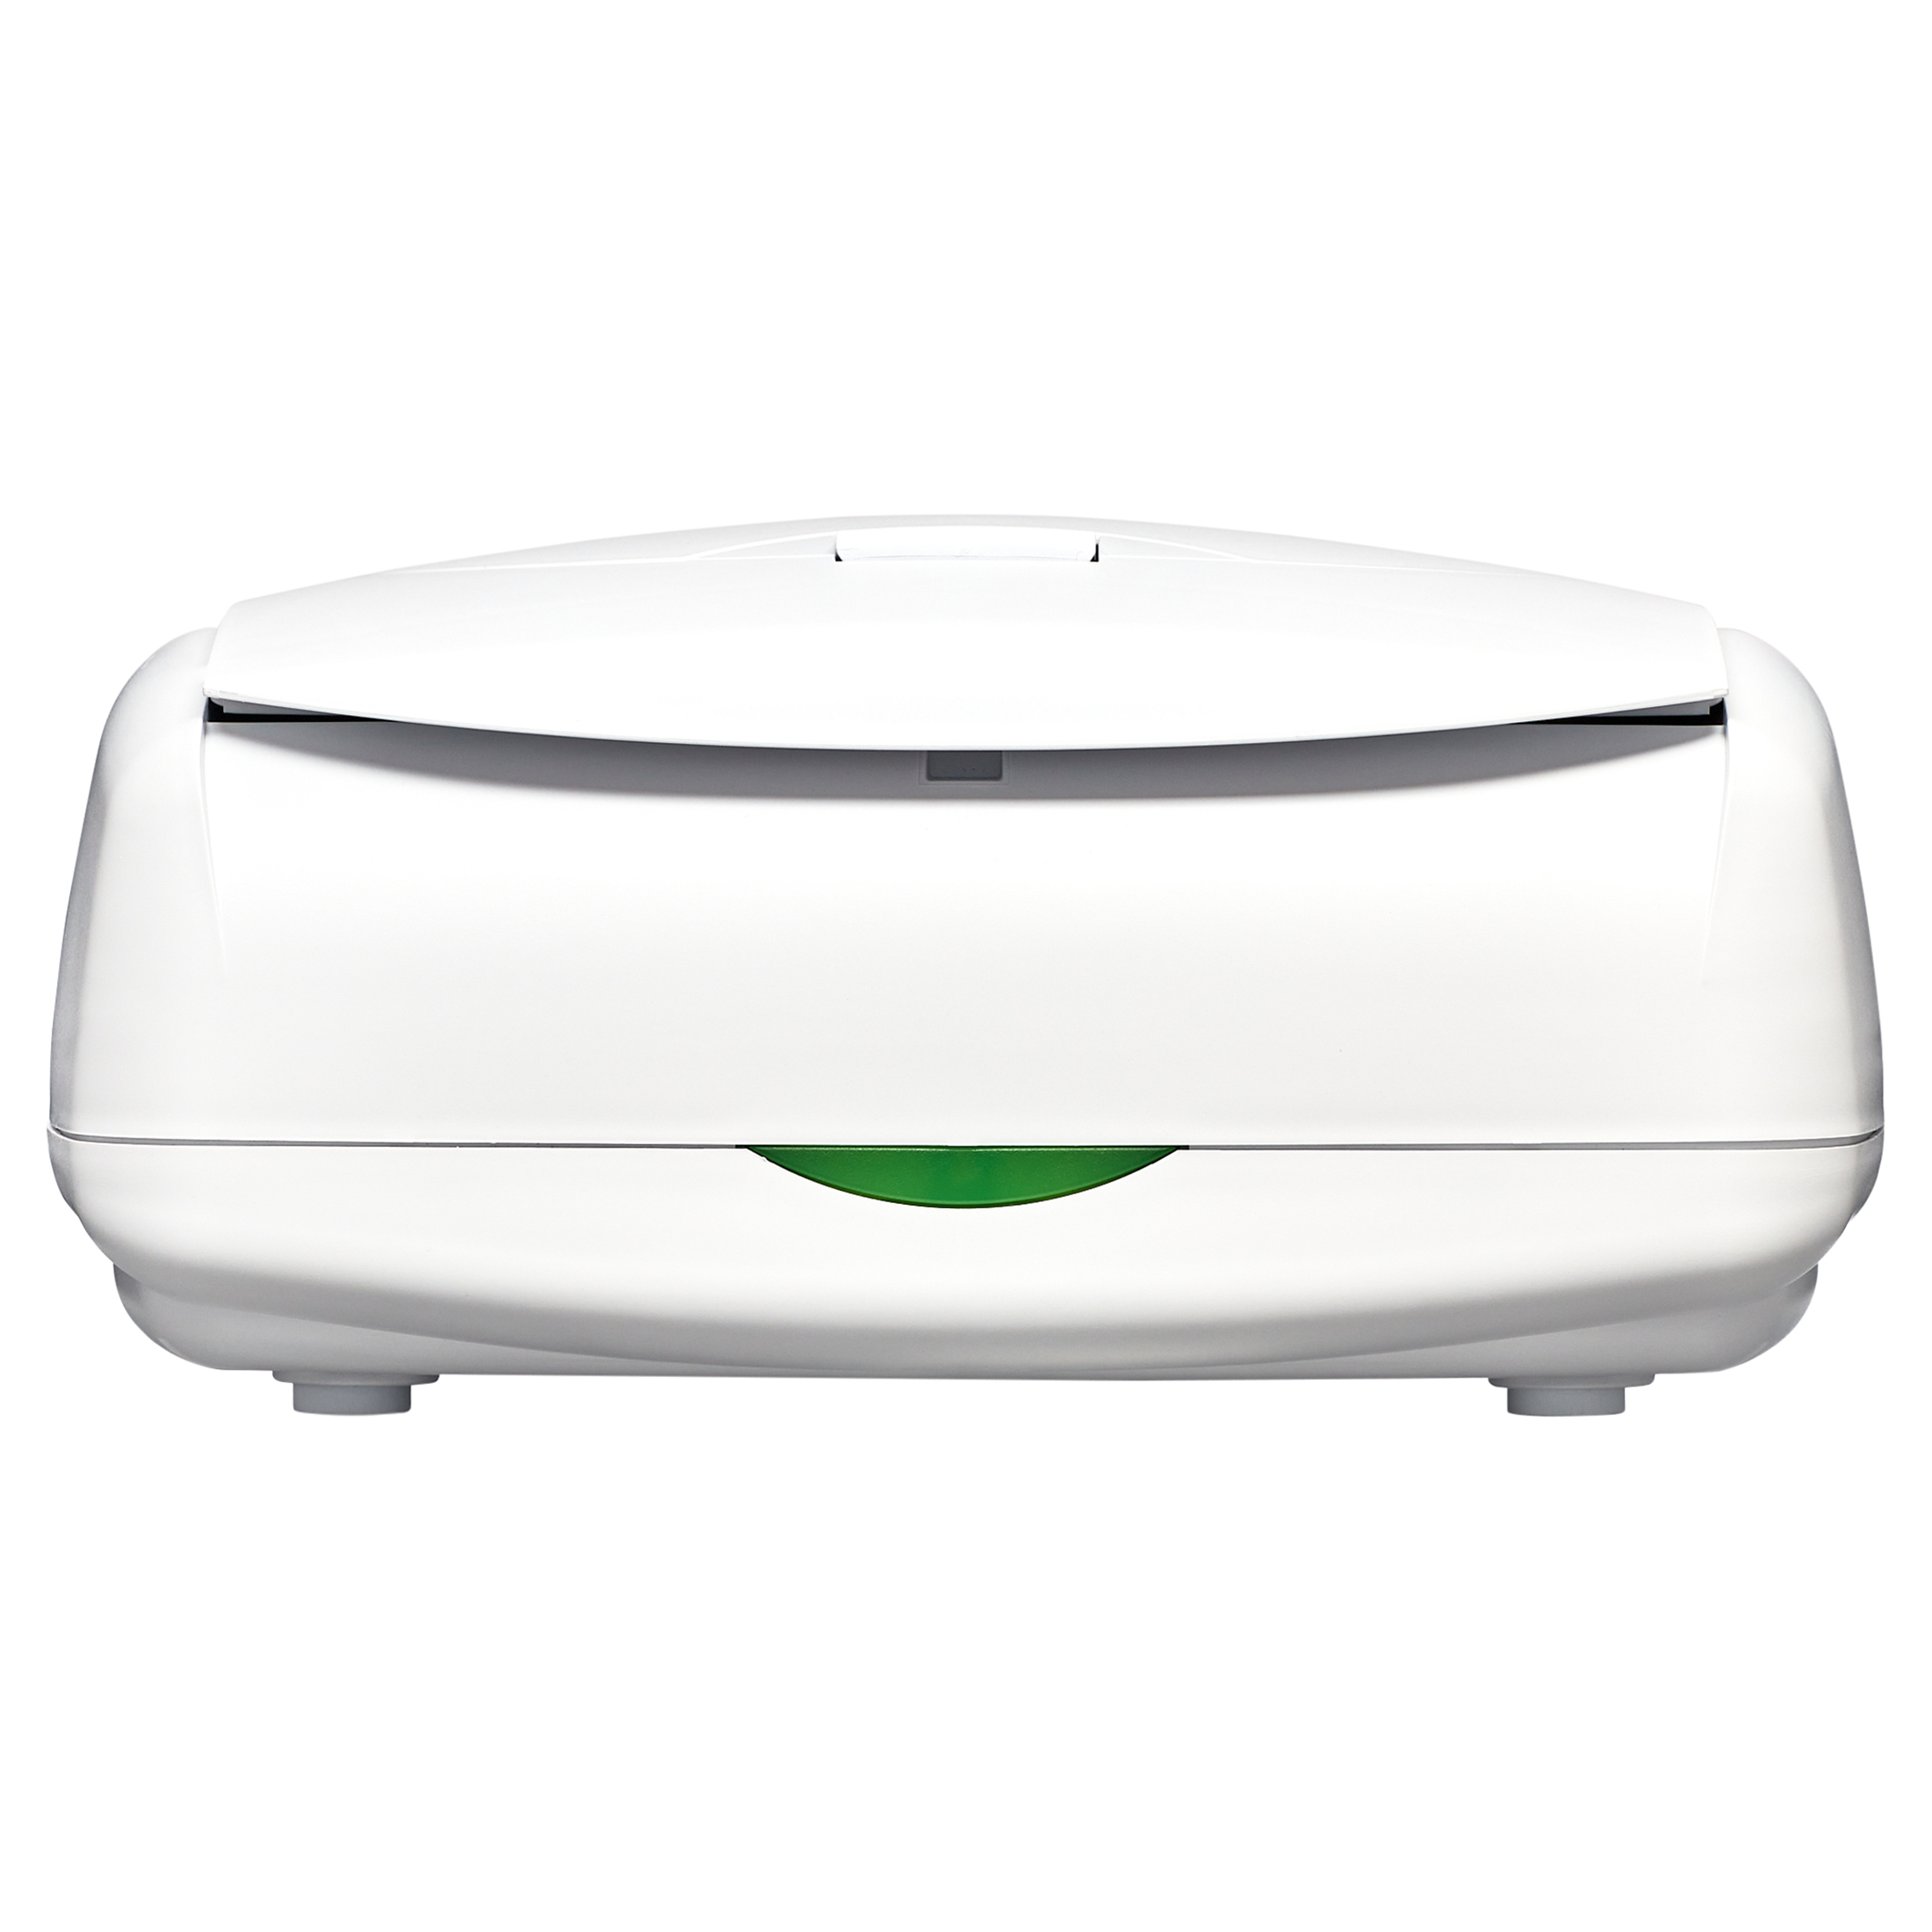 Prince Lionheart Ultimate Baby Wipe Warmer, White - image 5 of 9